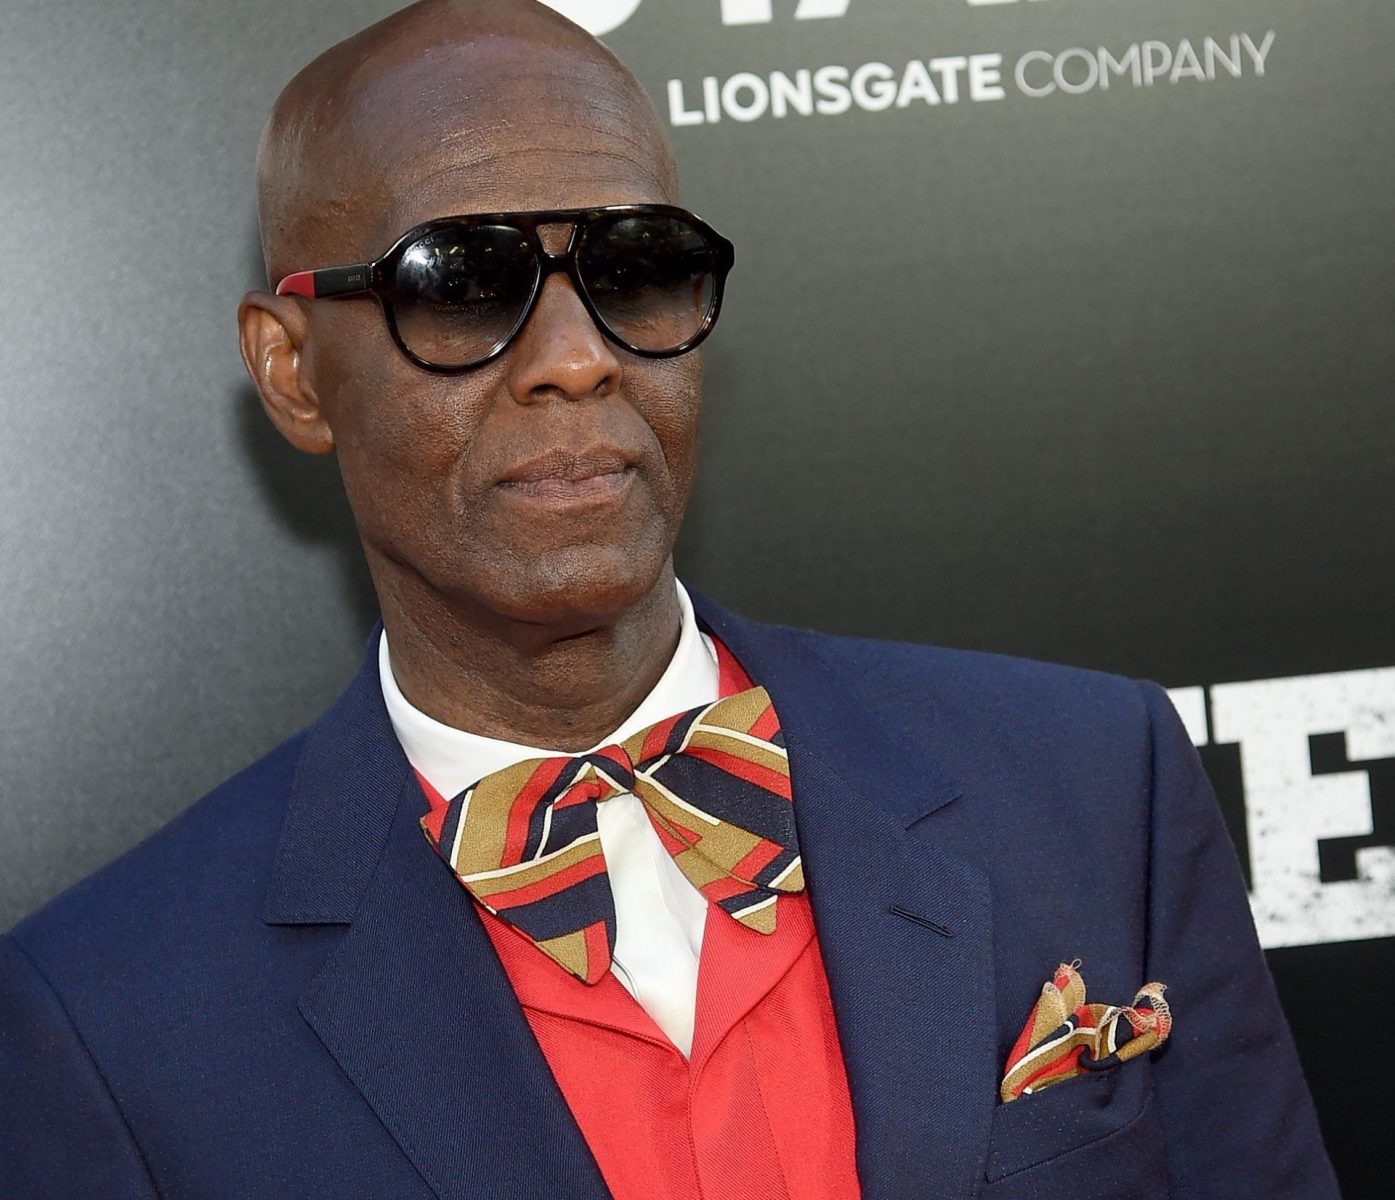 Icons before Instagram: Dapper Dan, and how his bootlegging